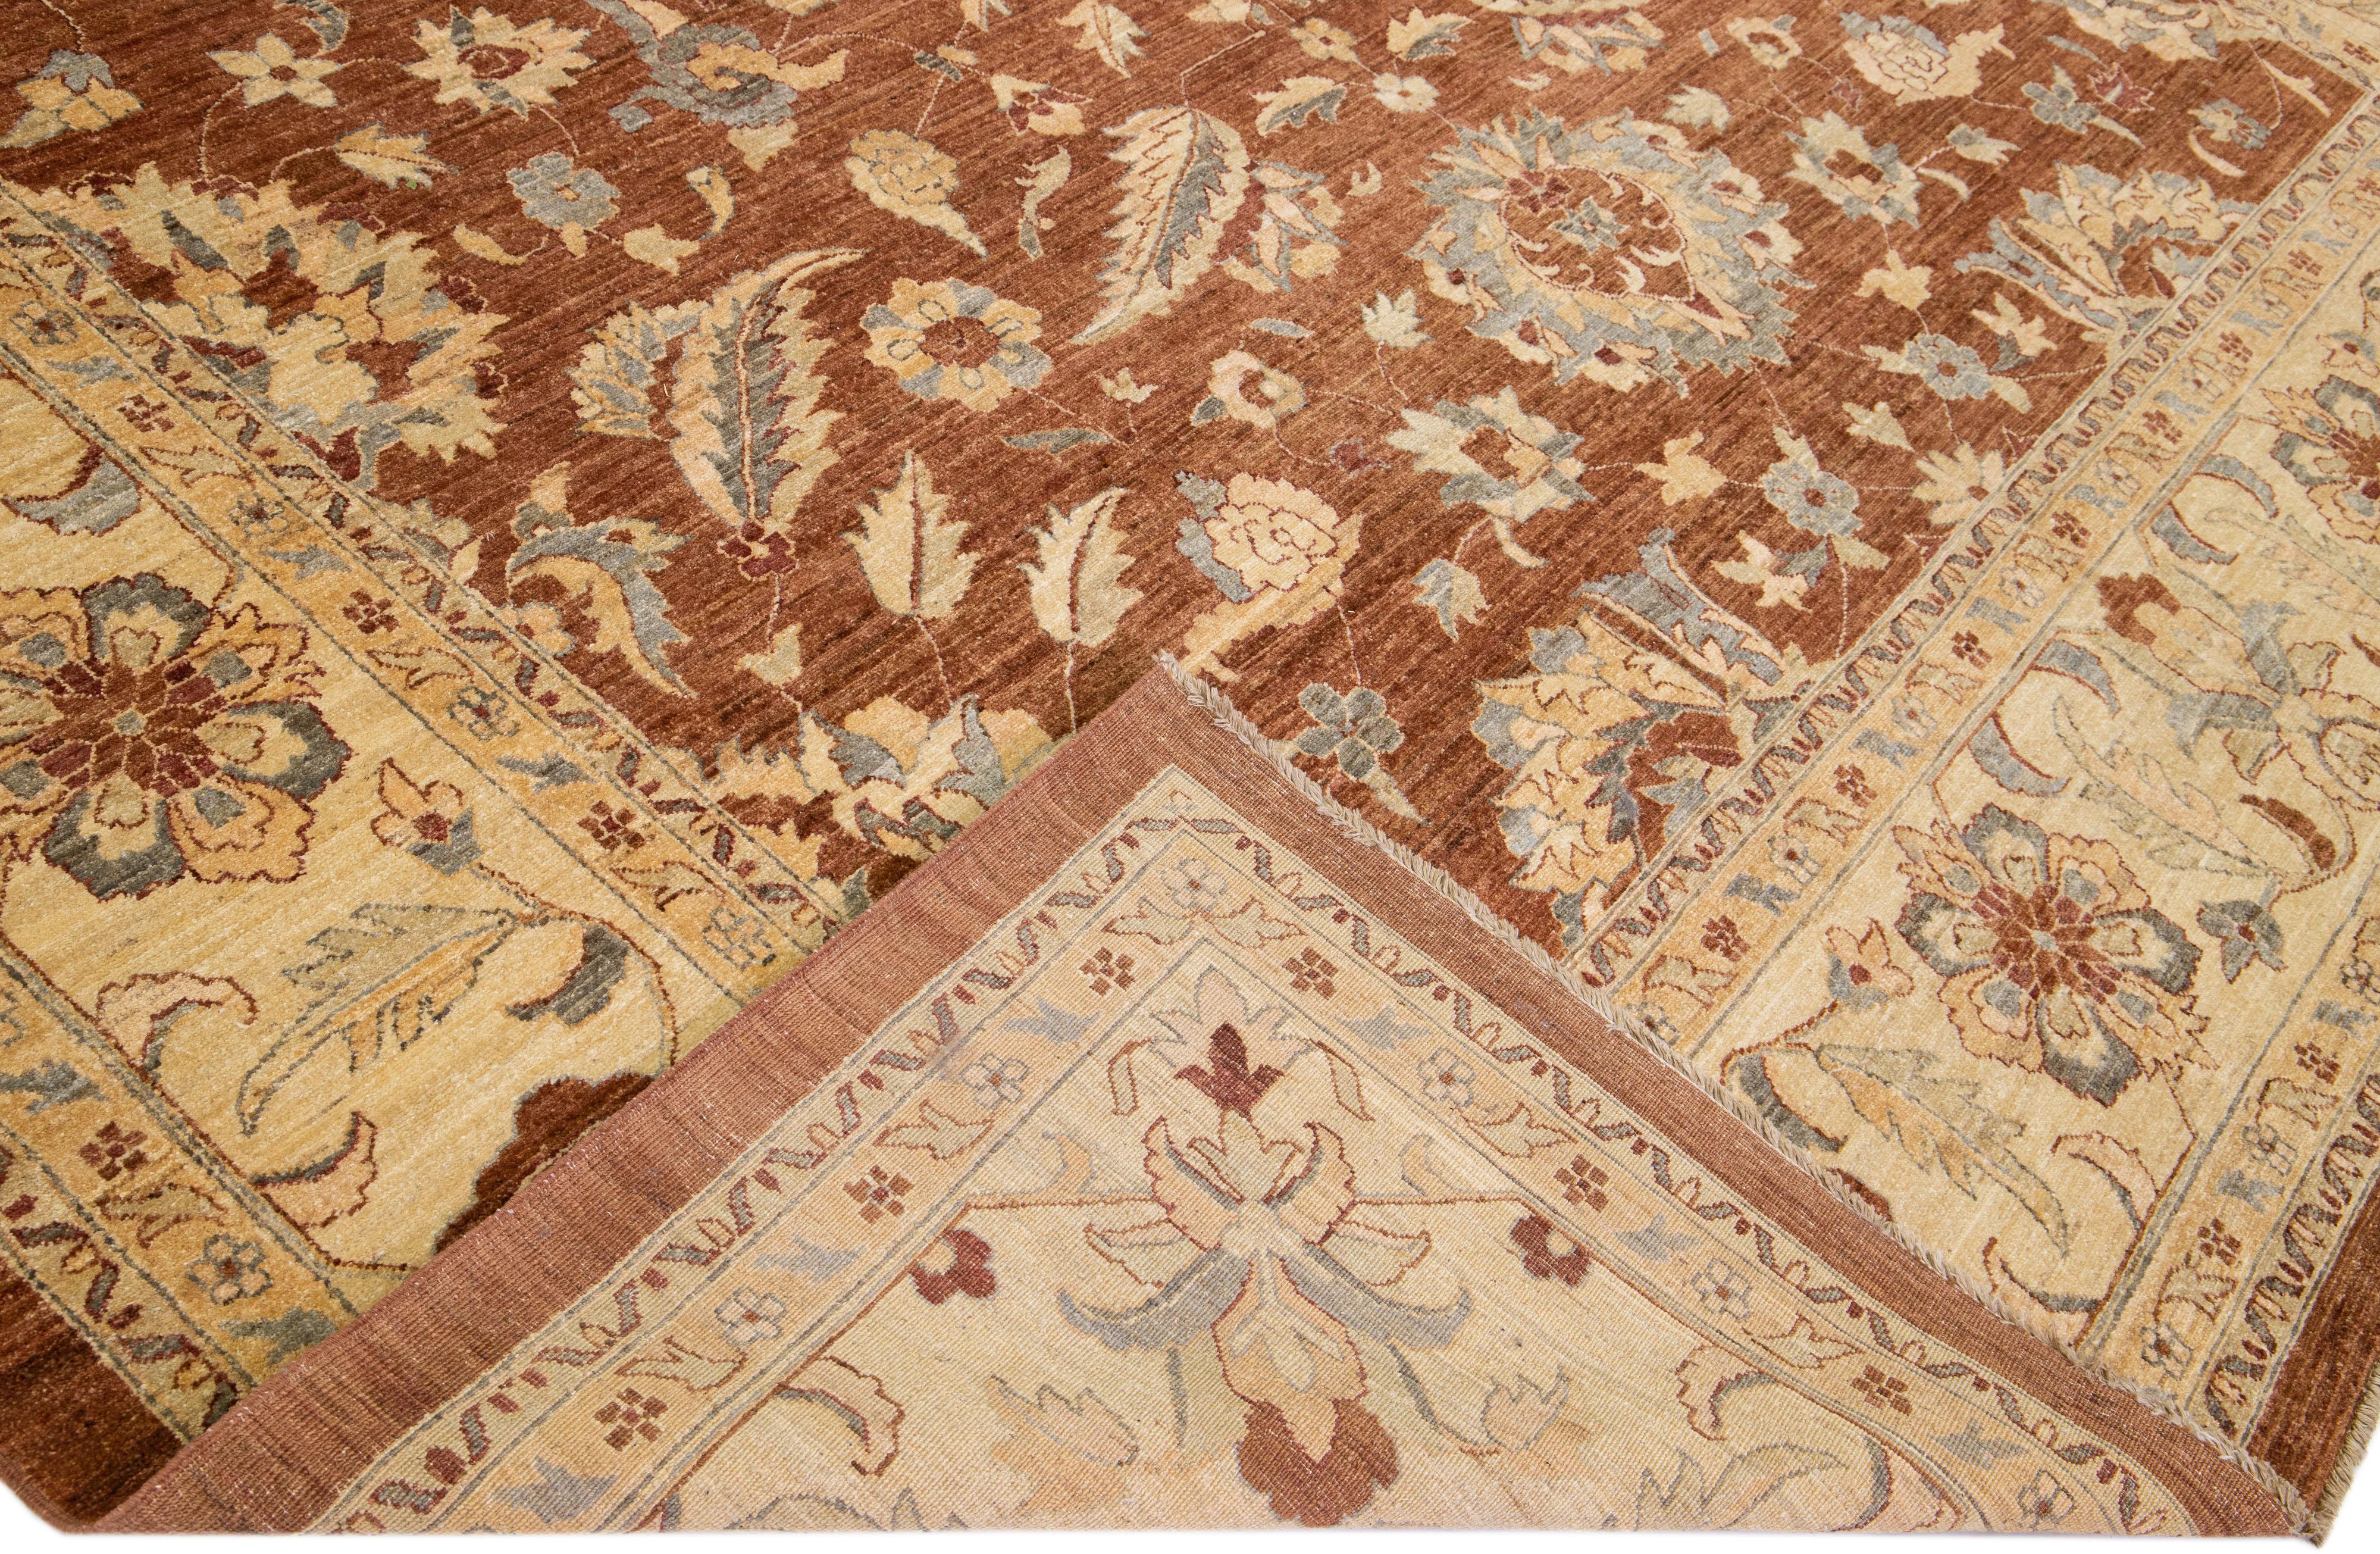 Beautiful antique Tabriz-style hand-knotted wool rug with a brown color field. This piece has a beige and blue accent in a gorgeous floral design.

This rug measures 12'6